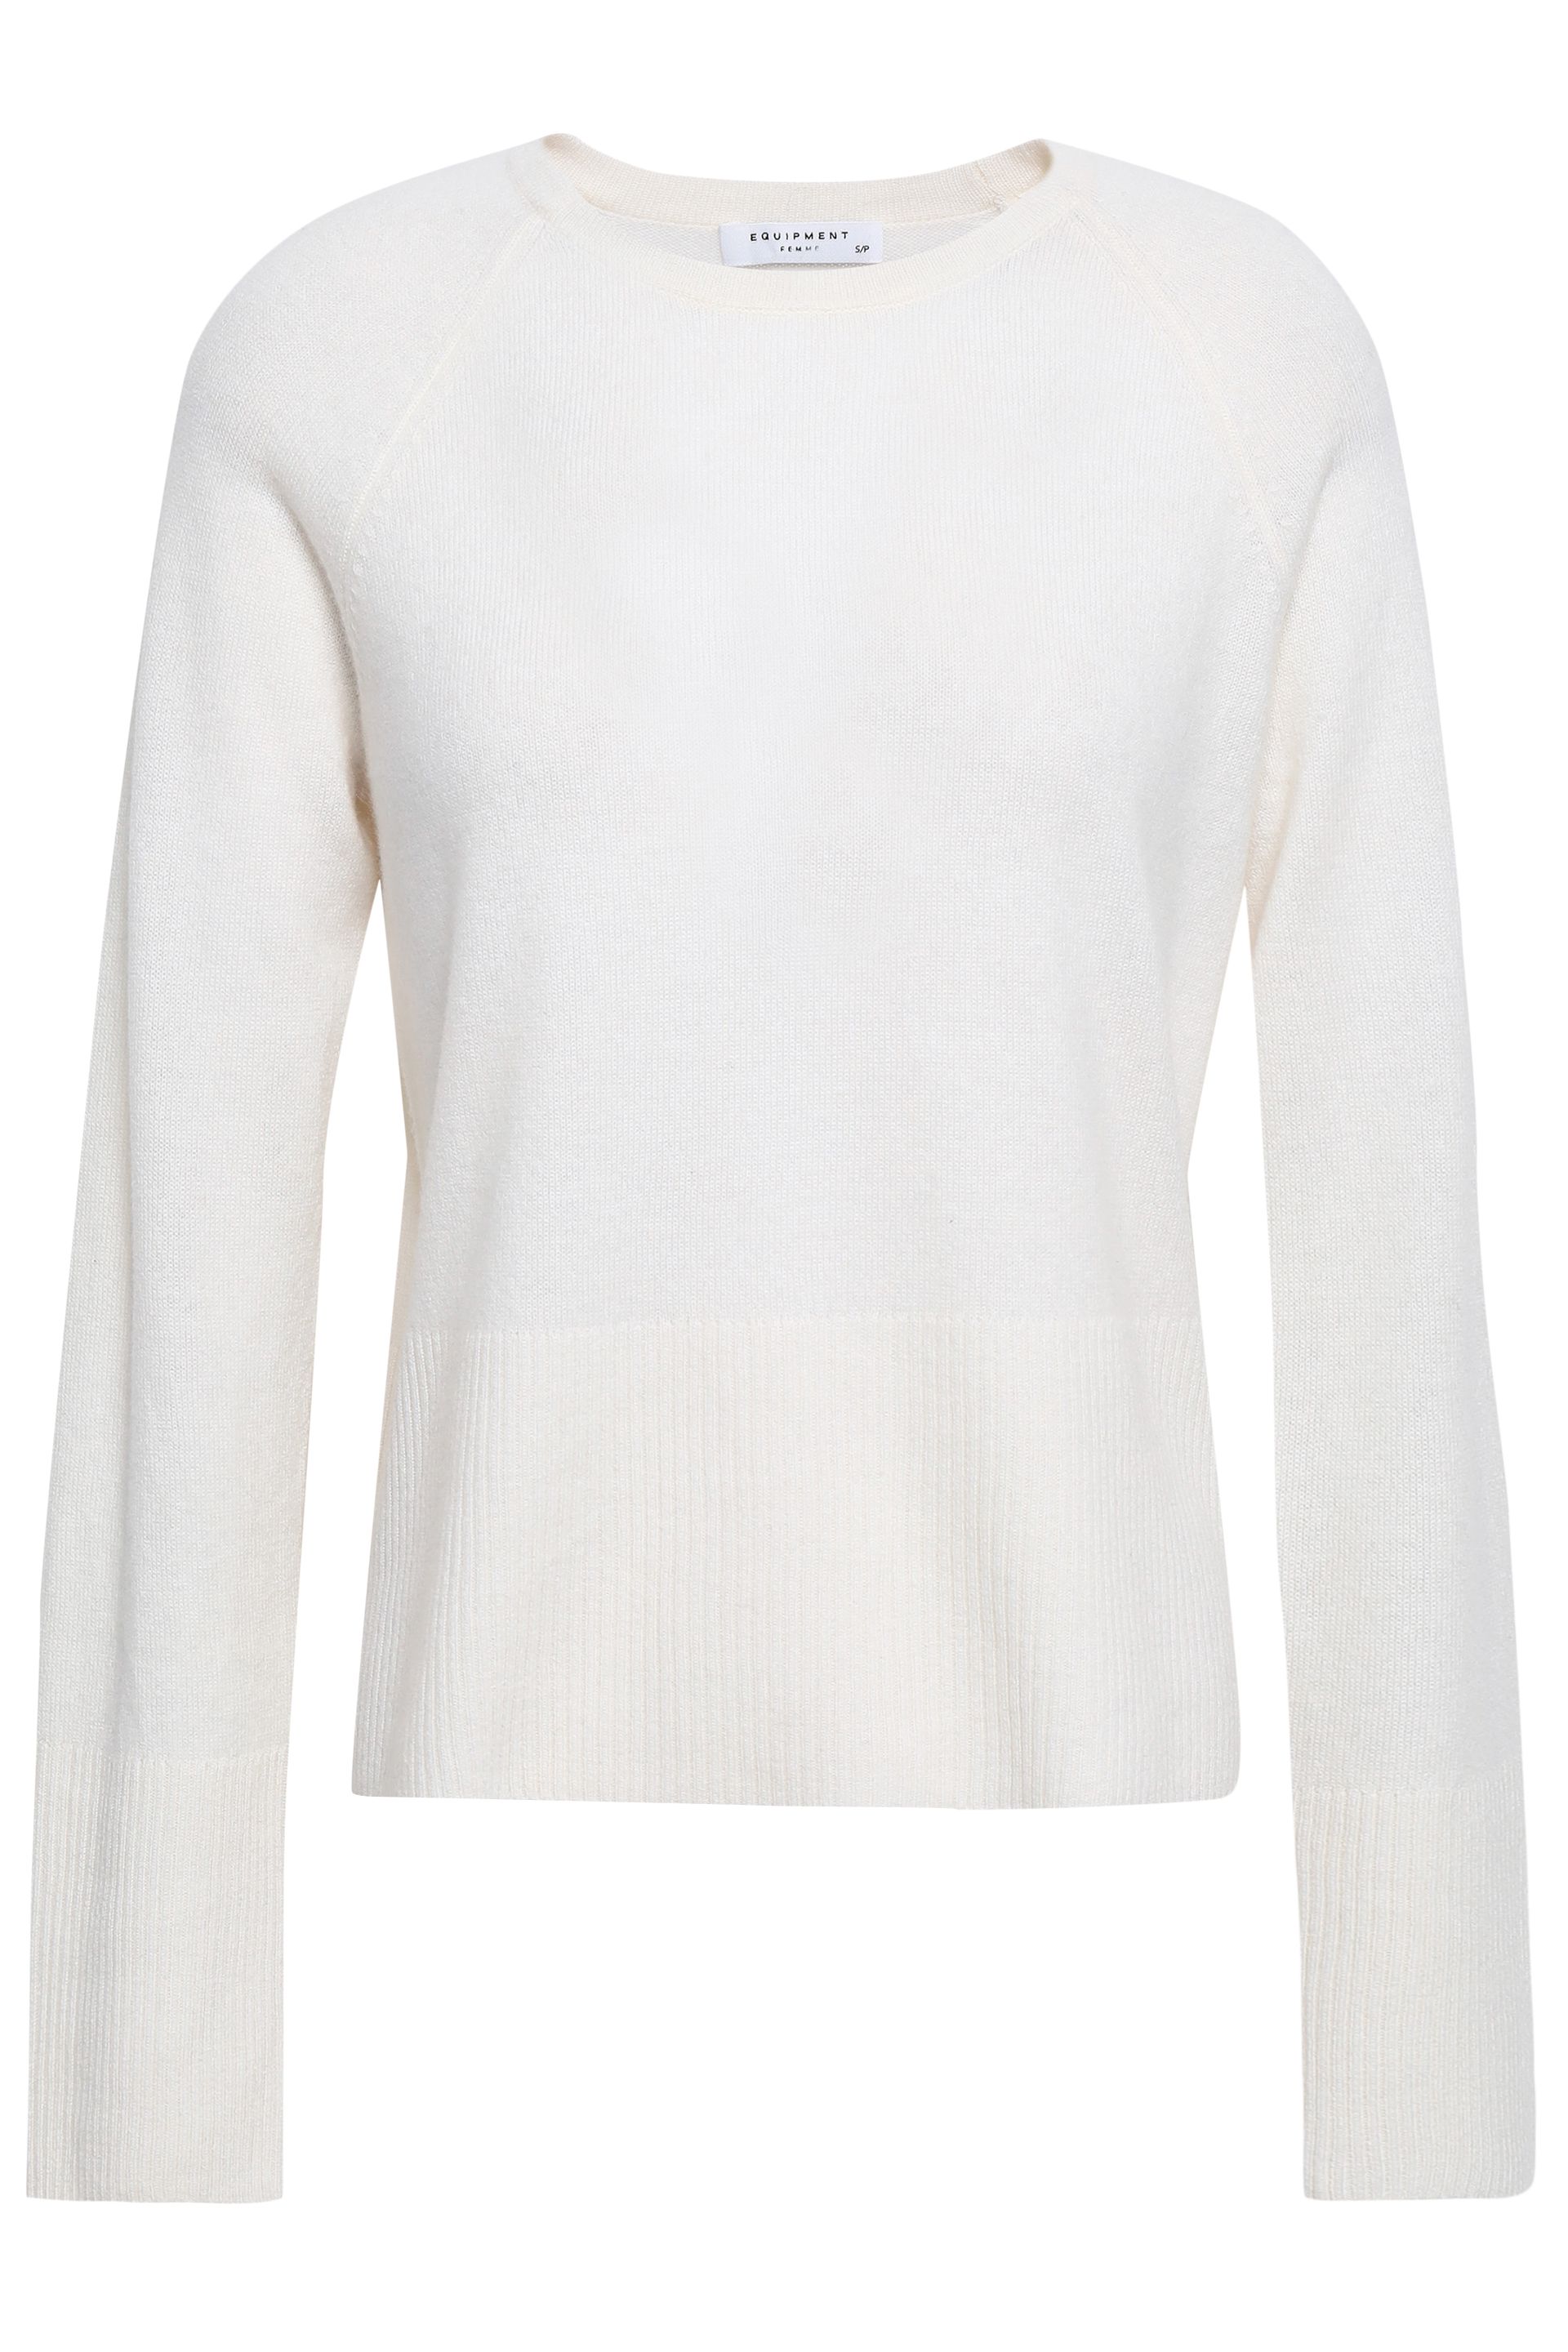 Women's Designer Knitwear | Sale Up To 70% Off At THE OUTNET